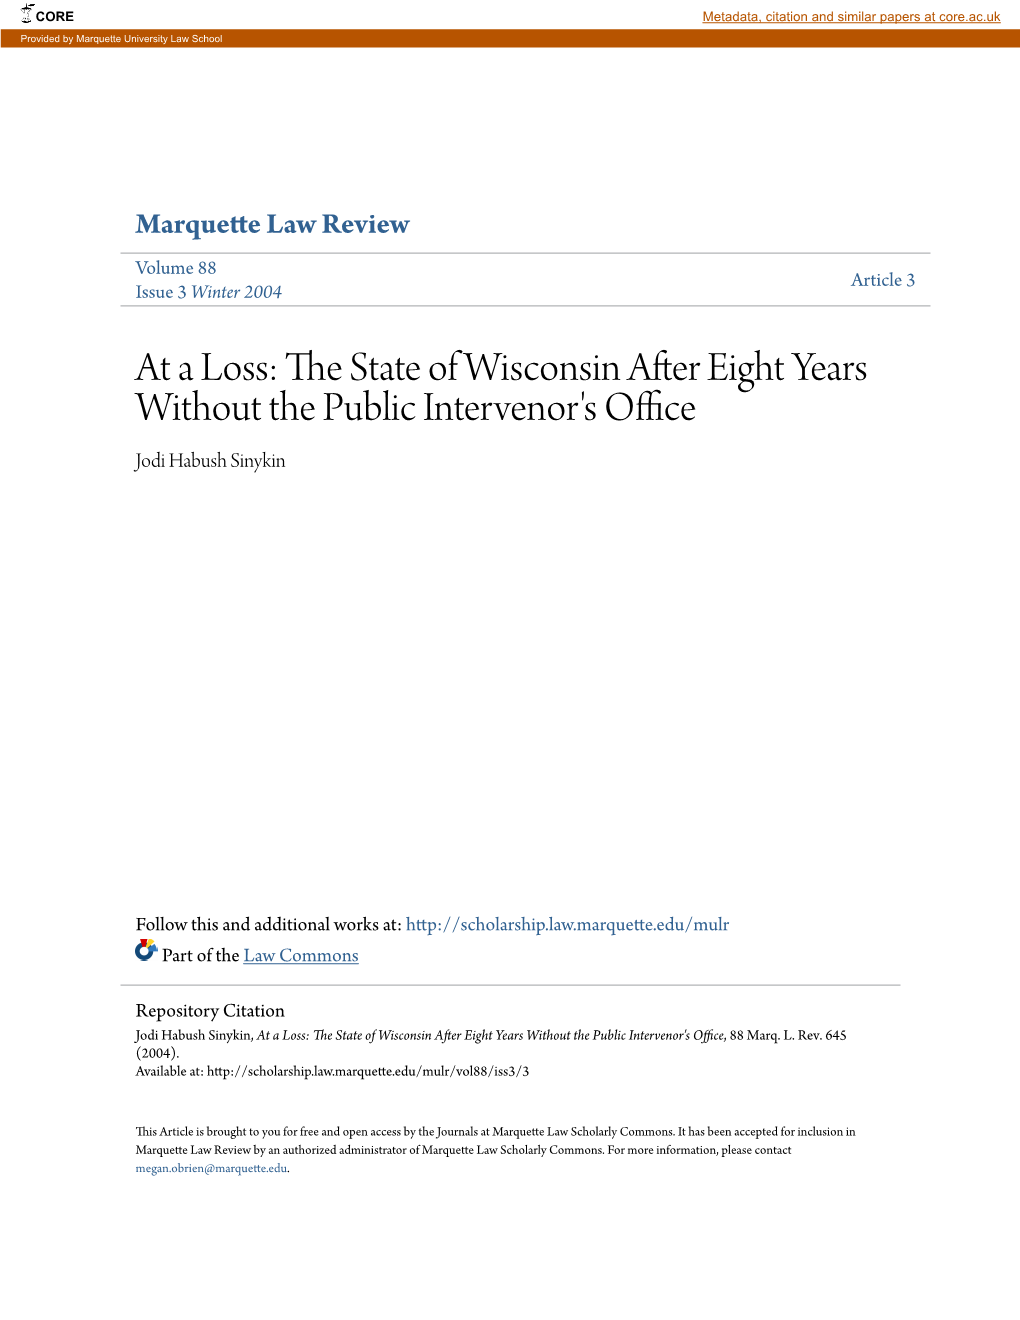 The State of Wisconsin After Eight Years Without the Public Intervenor's Office, 88 Marq